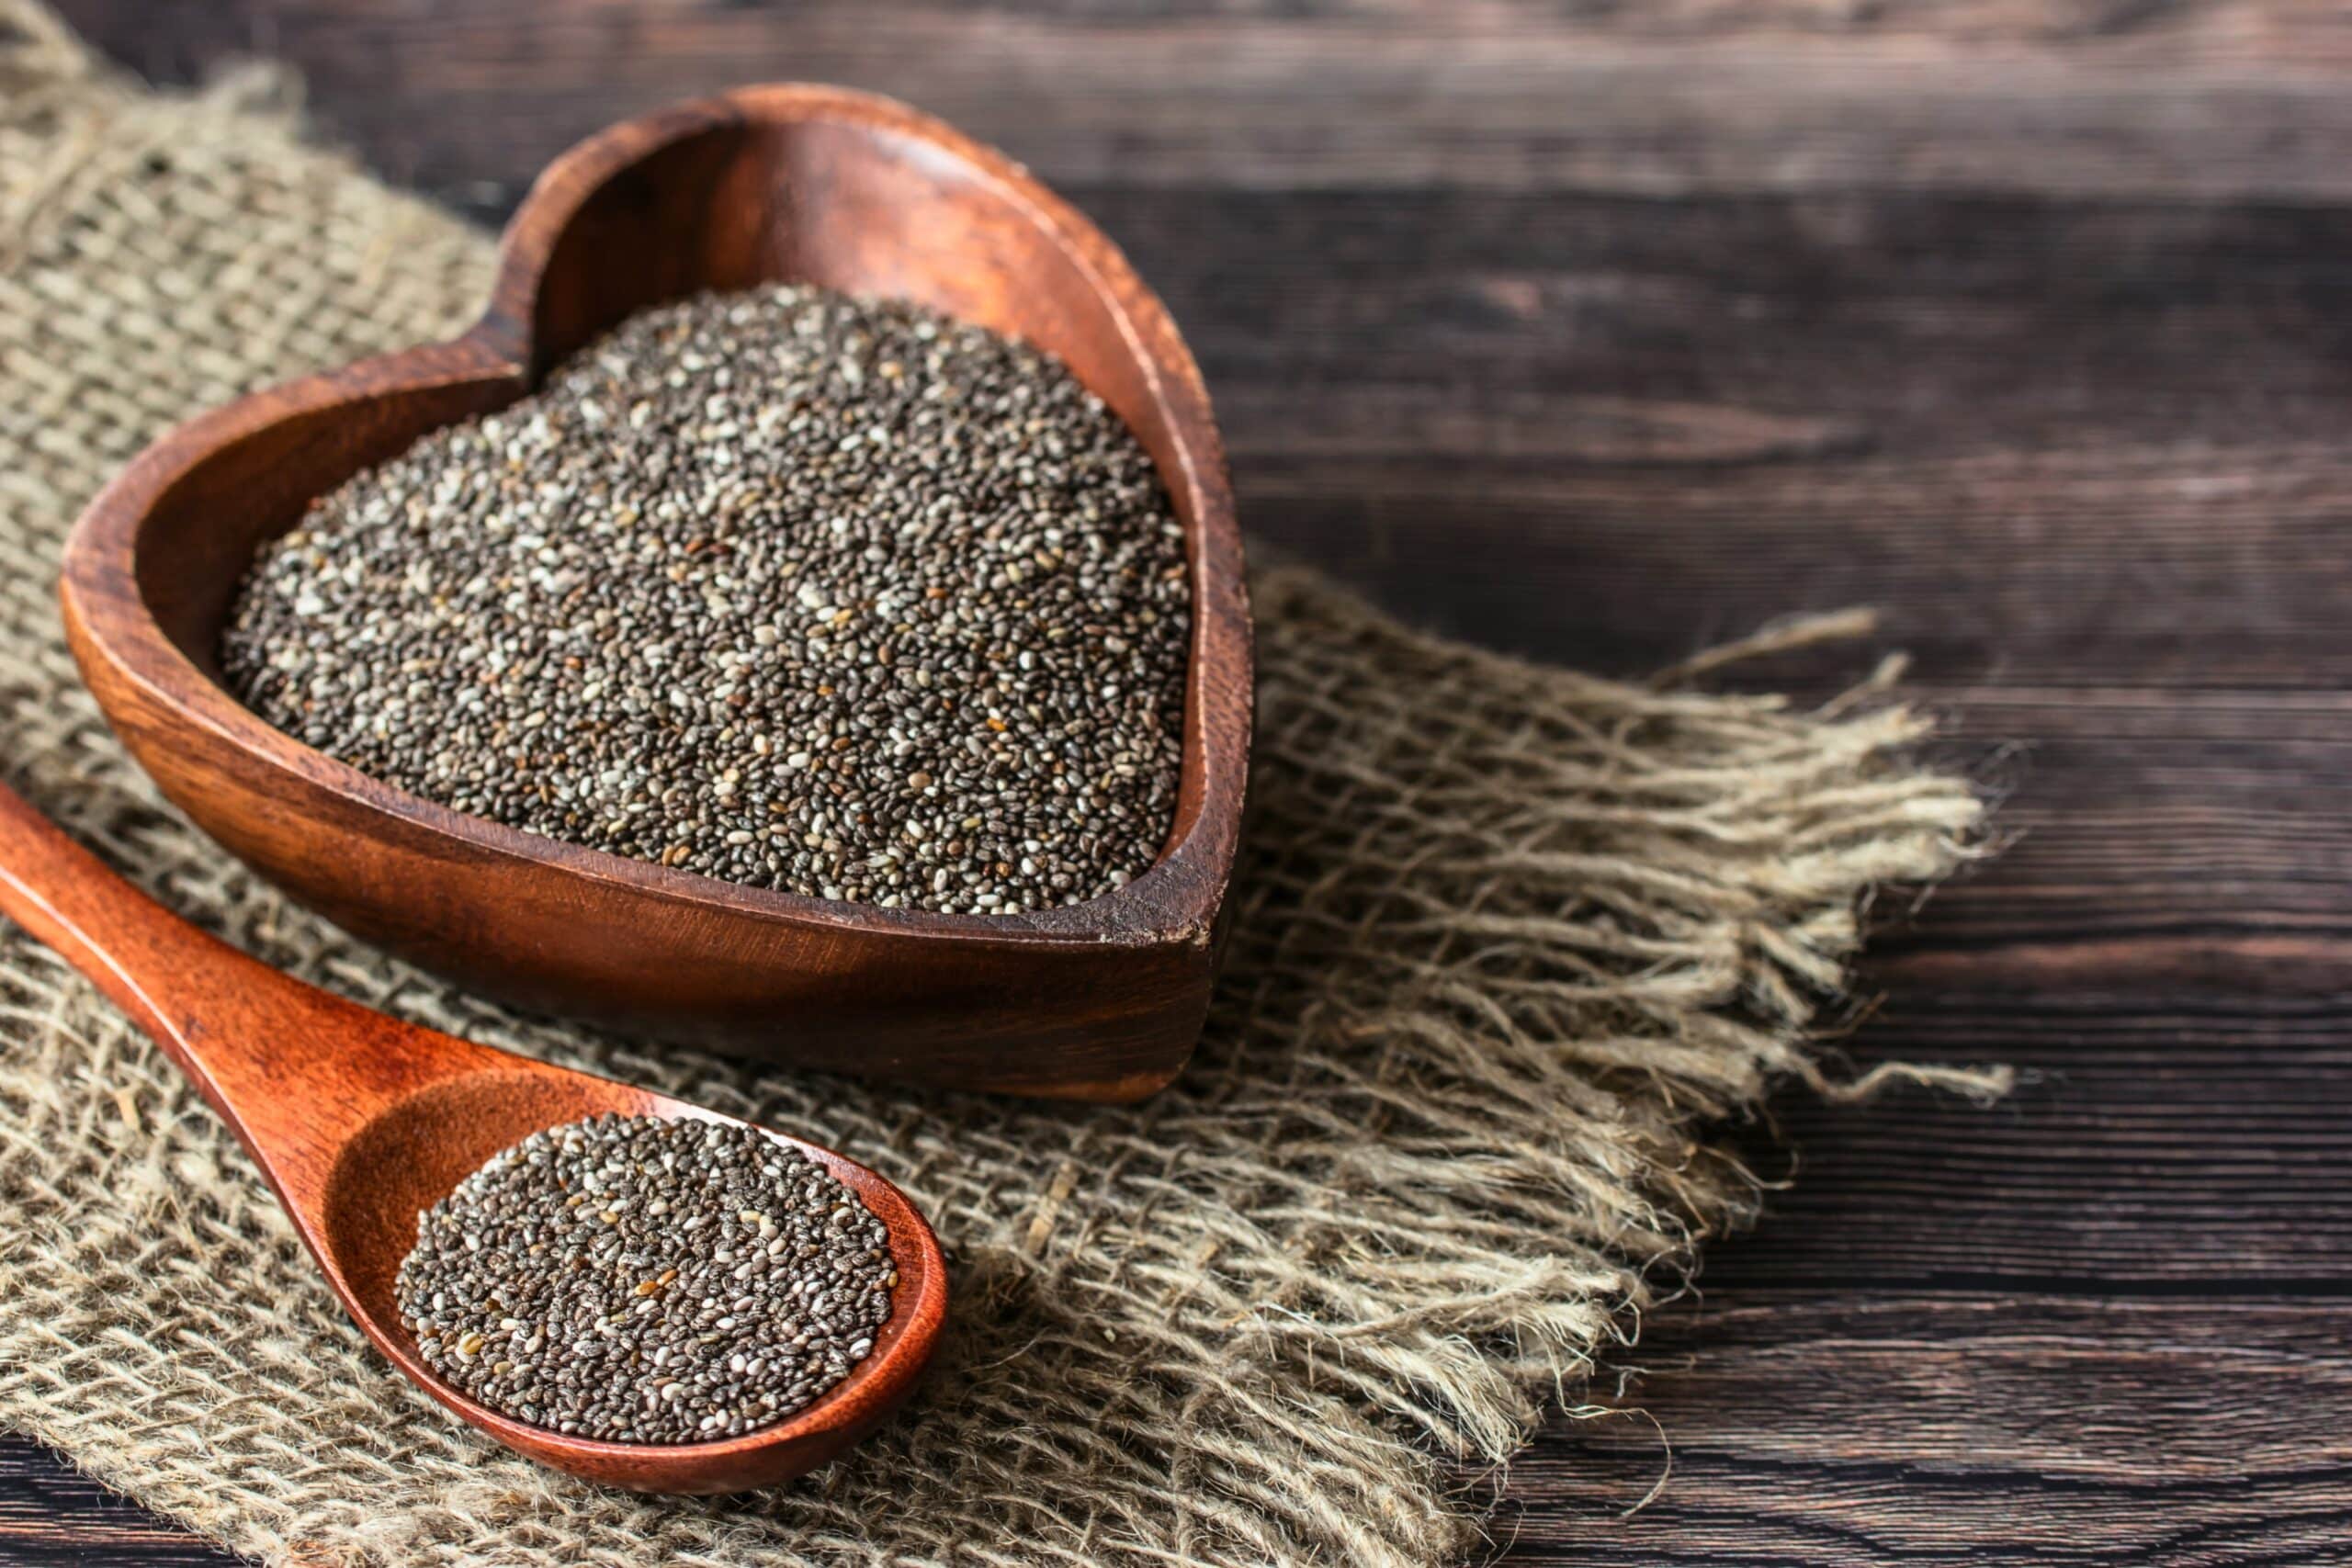 Small But Mighty: Chia Seeds Pack A Powerful Nutritional Punch